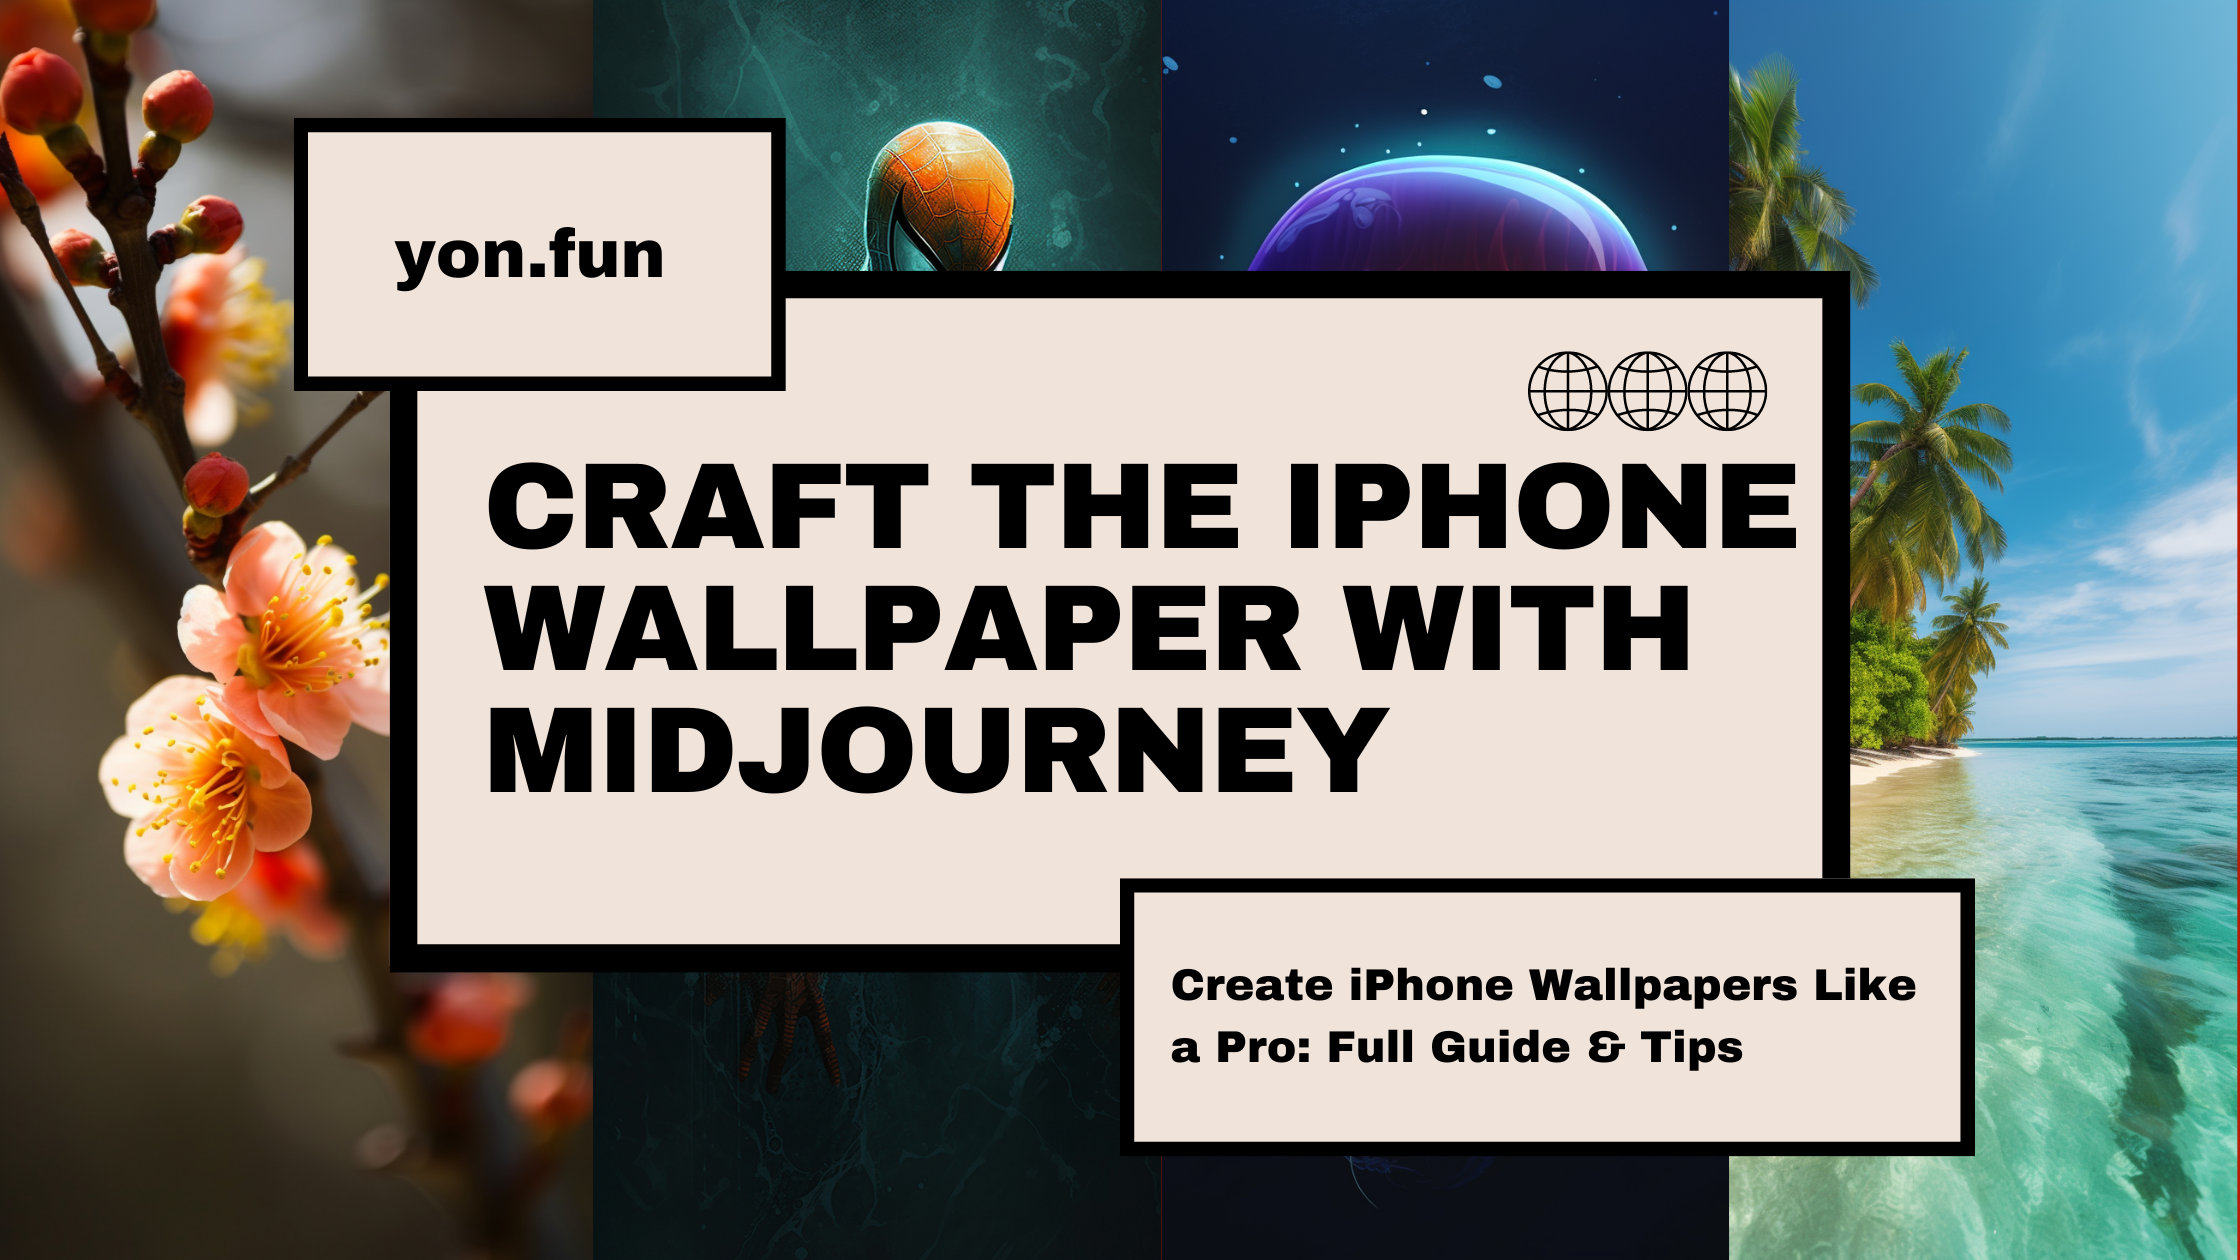 34+ Breathtaking Midjourney Prompts for Unforgettable Wallpapers